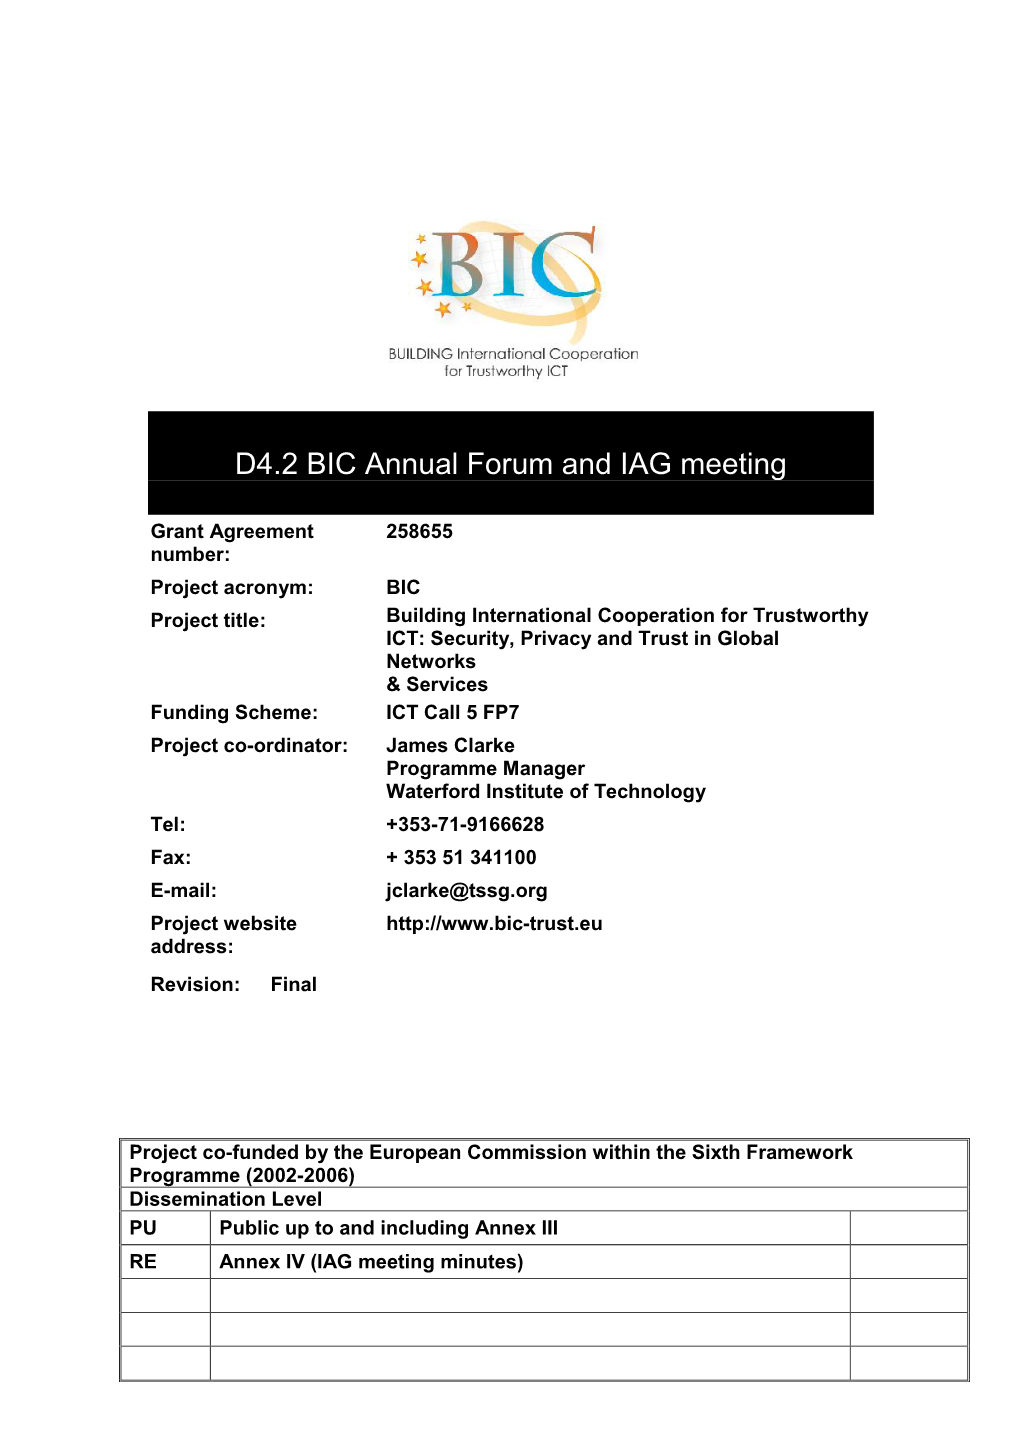 D4.2 BIC Annual Forum and IAG Meeting